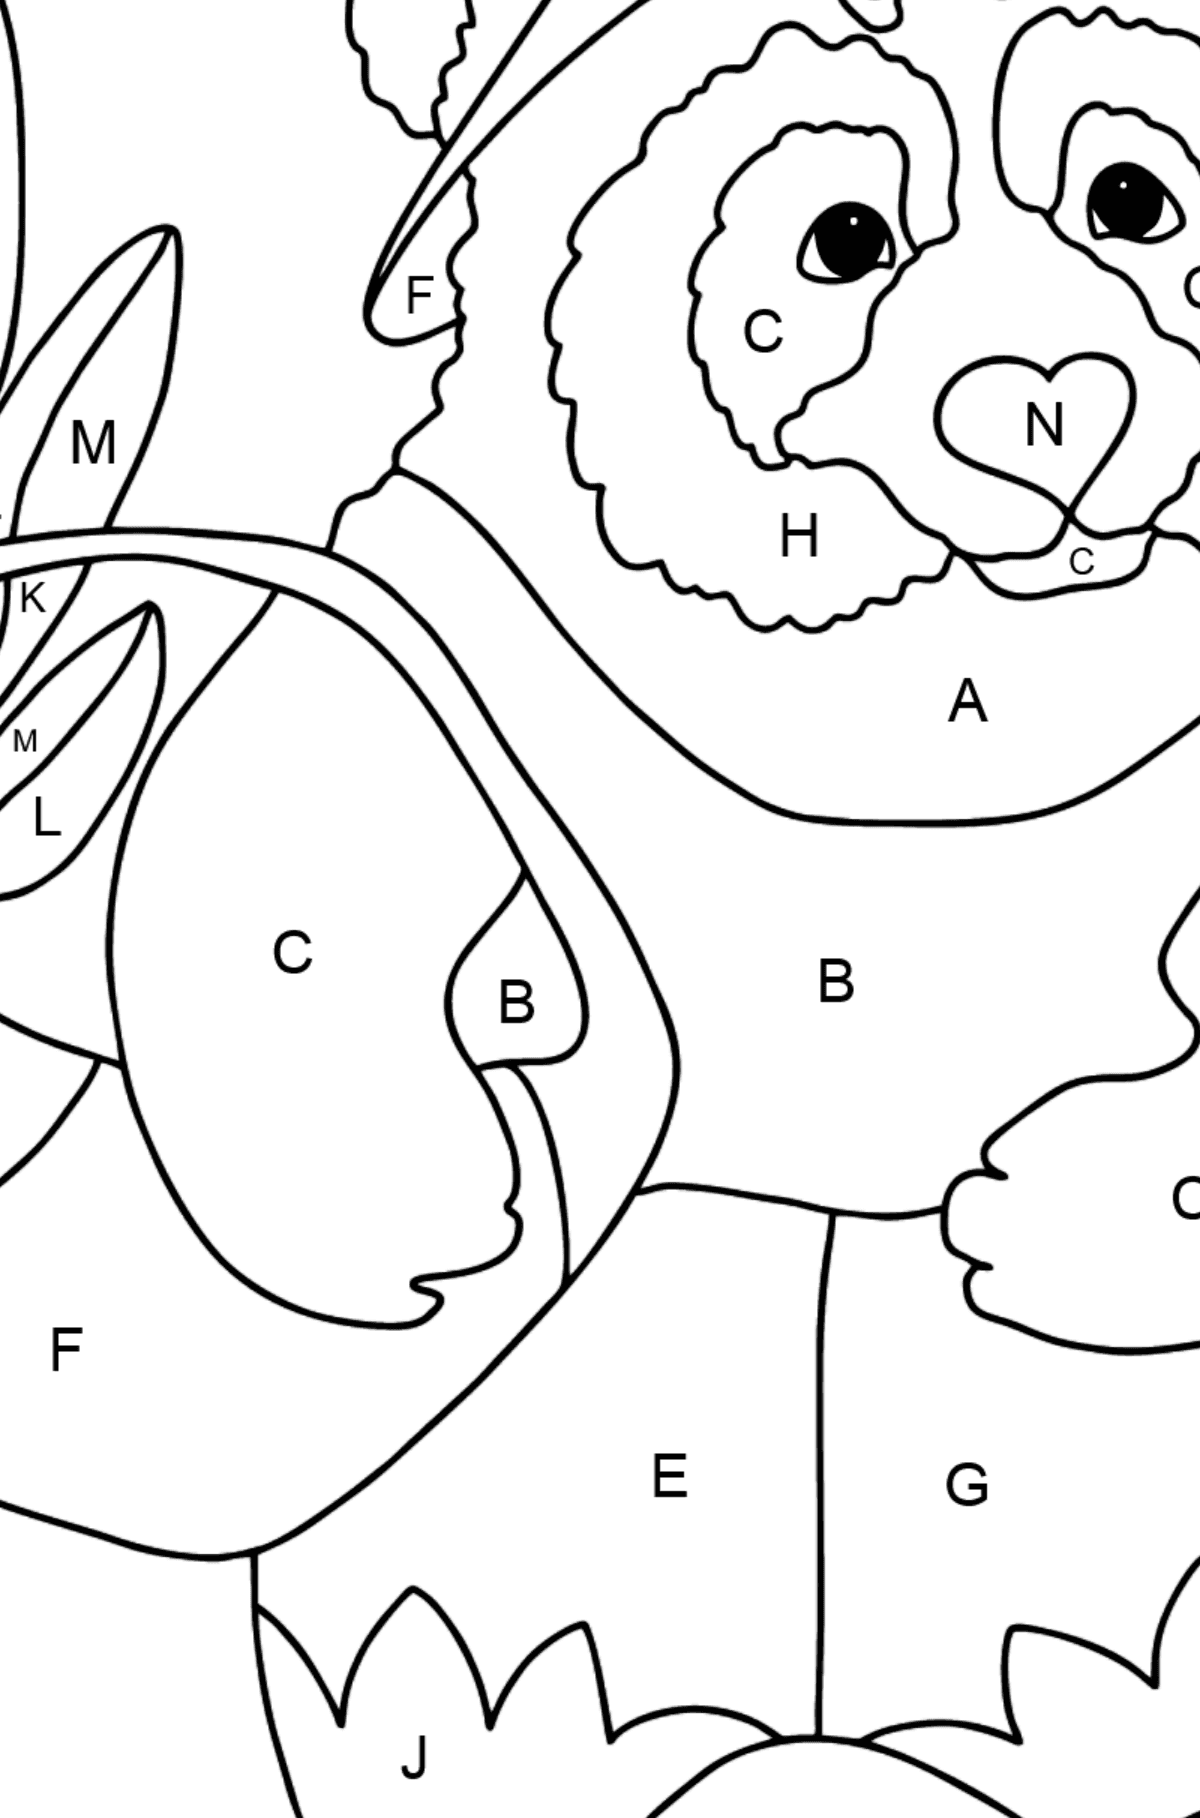 Coloring Page - A Panda with a Crop Basket - Coloring by Letters for Kids